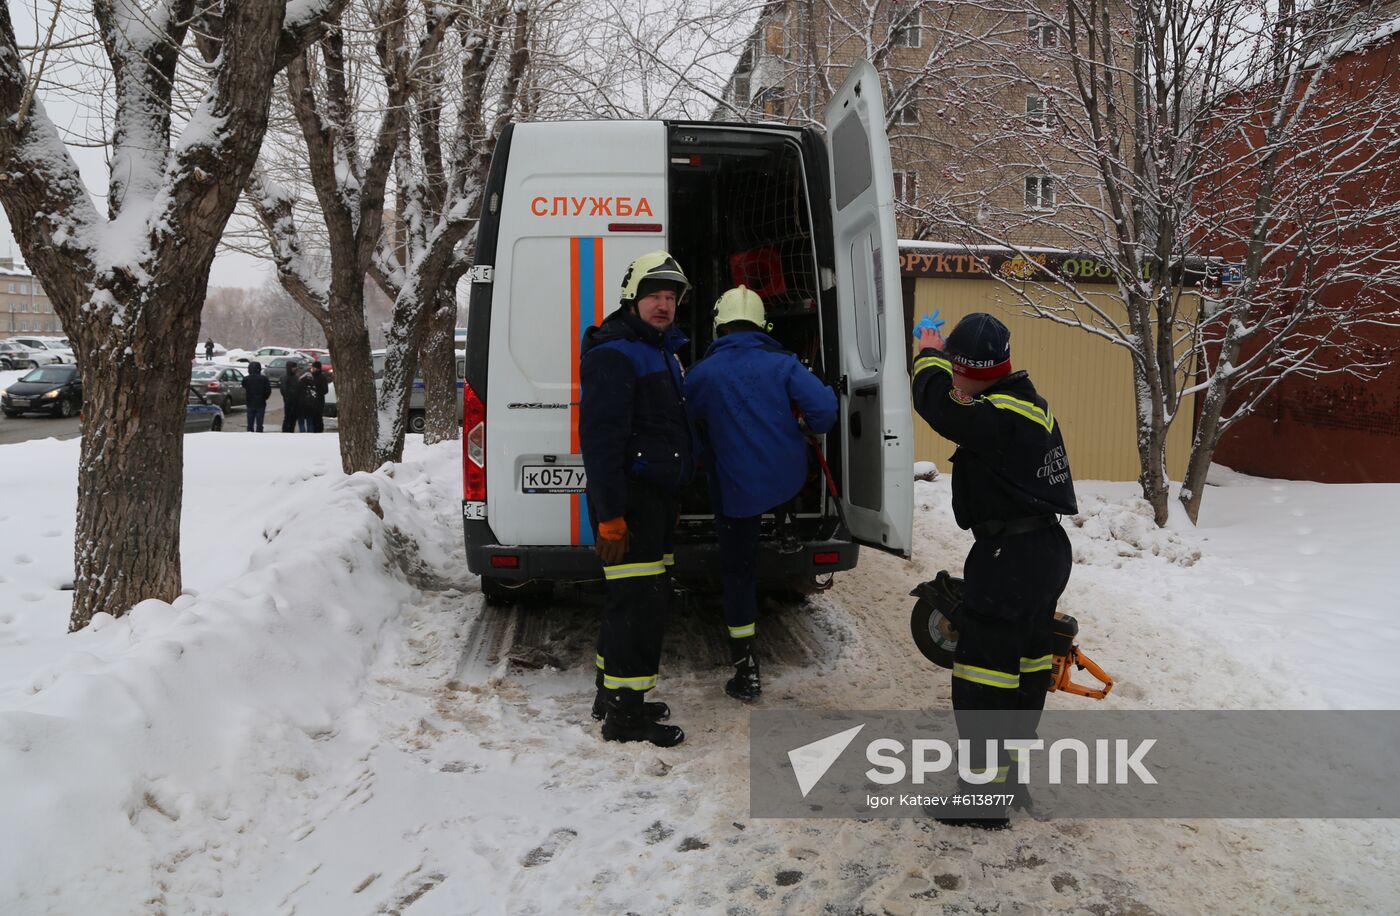 Russia Hotel Heating Pipe Incident